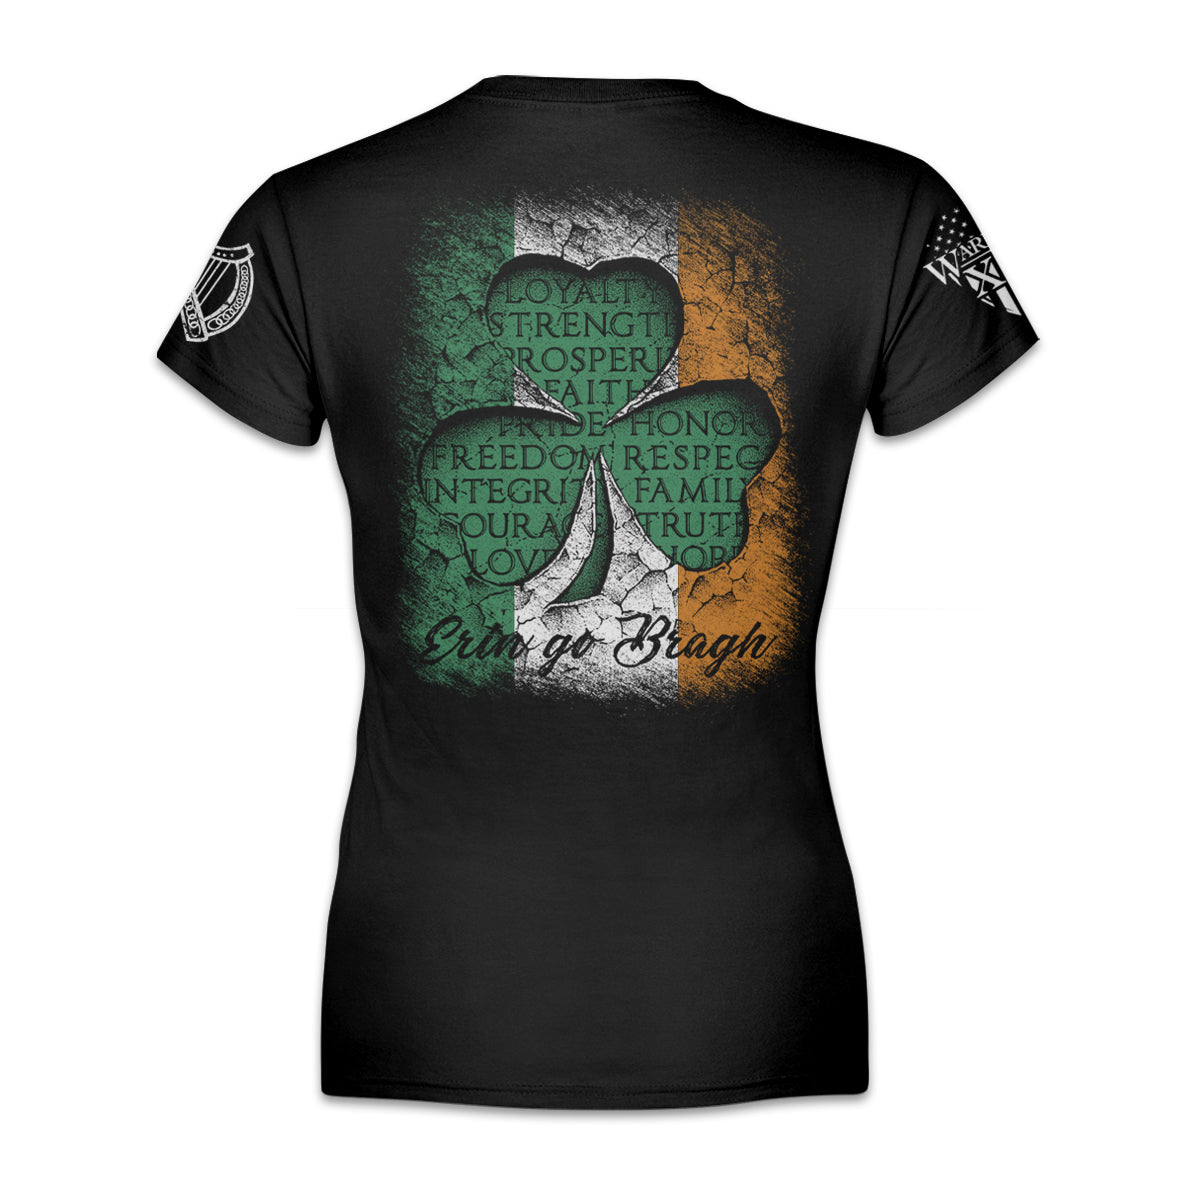 A black women's relaxed fit'shirt with the words "Erin Go Bragh" which means means "Ireland until the end of time" or "Ireland Forever" in the Irish language as well as a a clover with the Irish Flag inside of it printed on the back of the shirt.